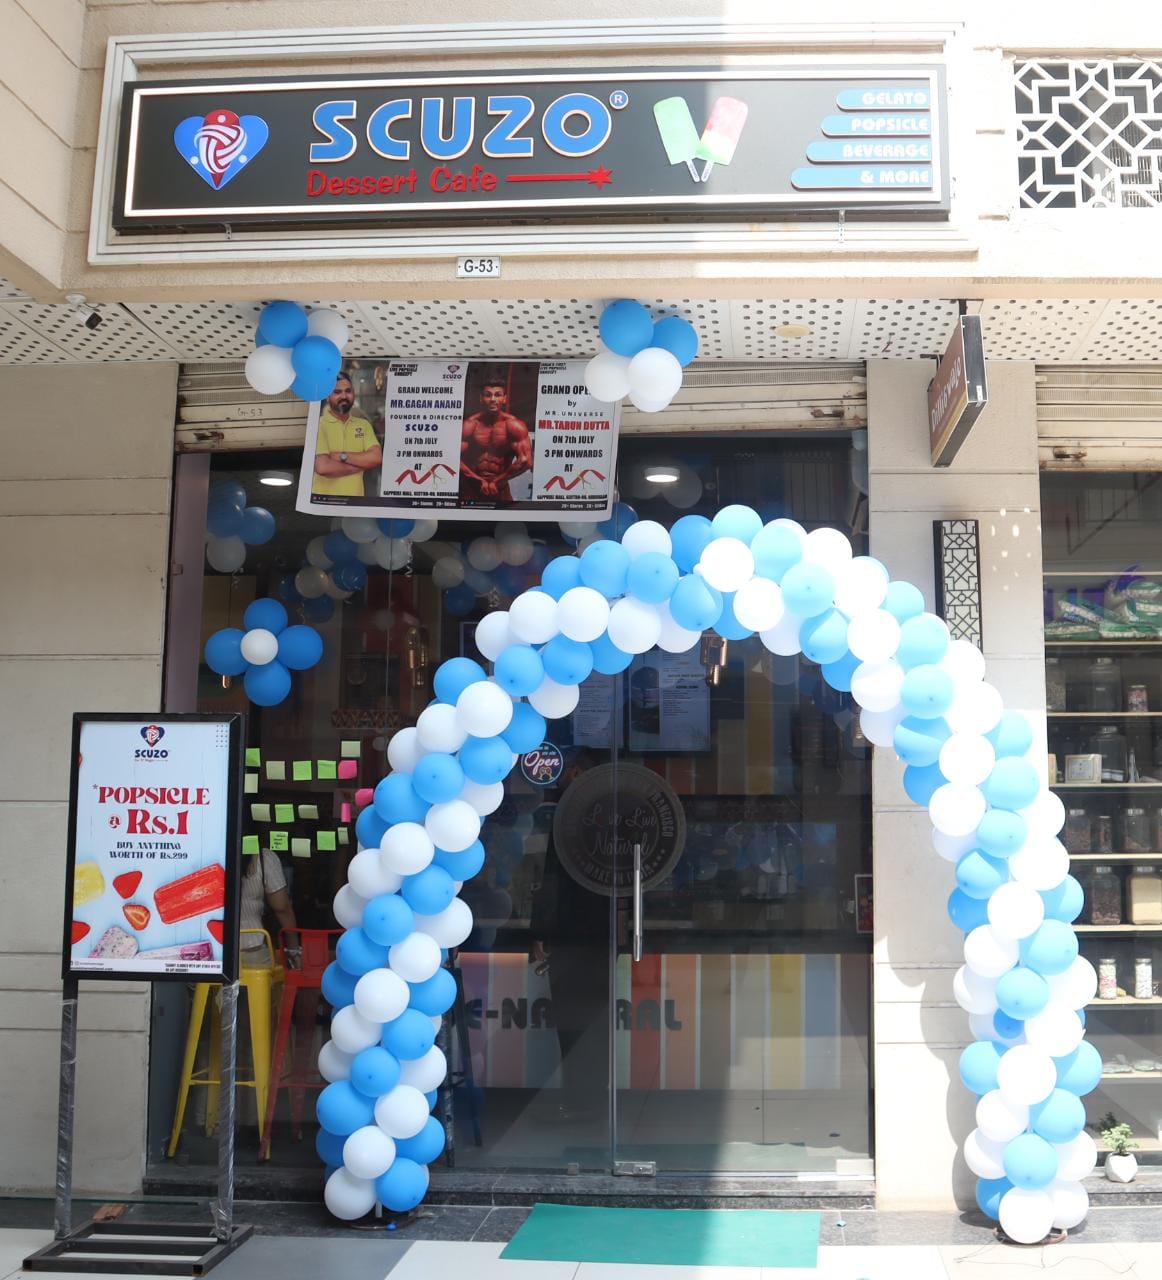 Scuzo Ice ‘O’ Magic  Dessert Cafe Expands with New Outlet in Gurugram.